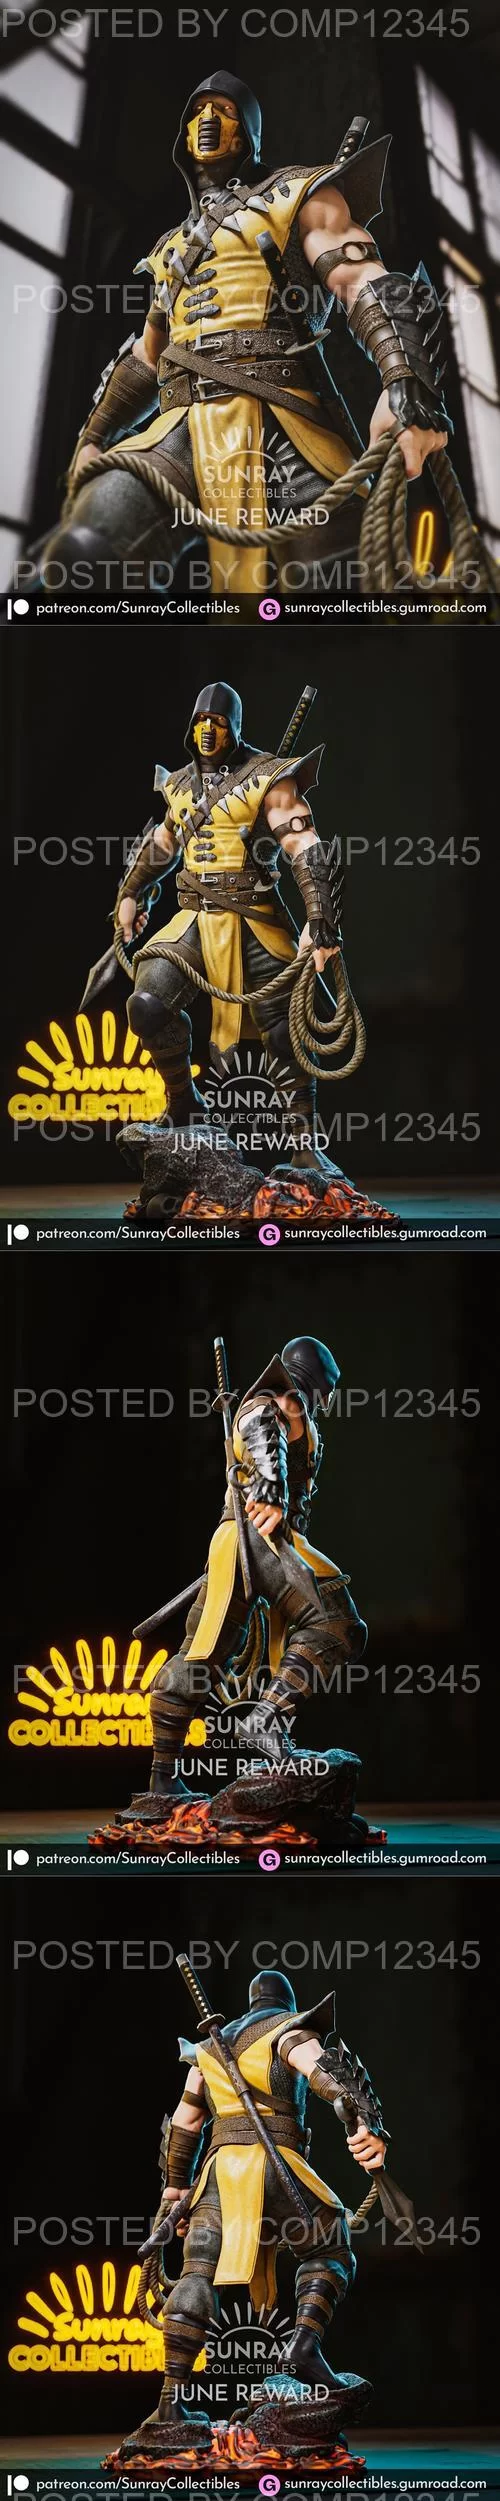 Sunray Collectibles - Scorpion